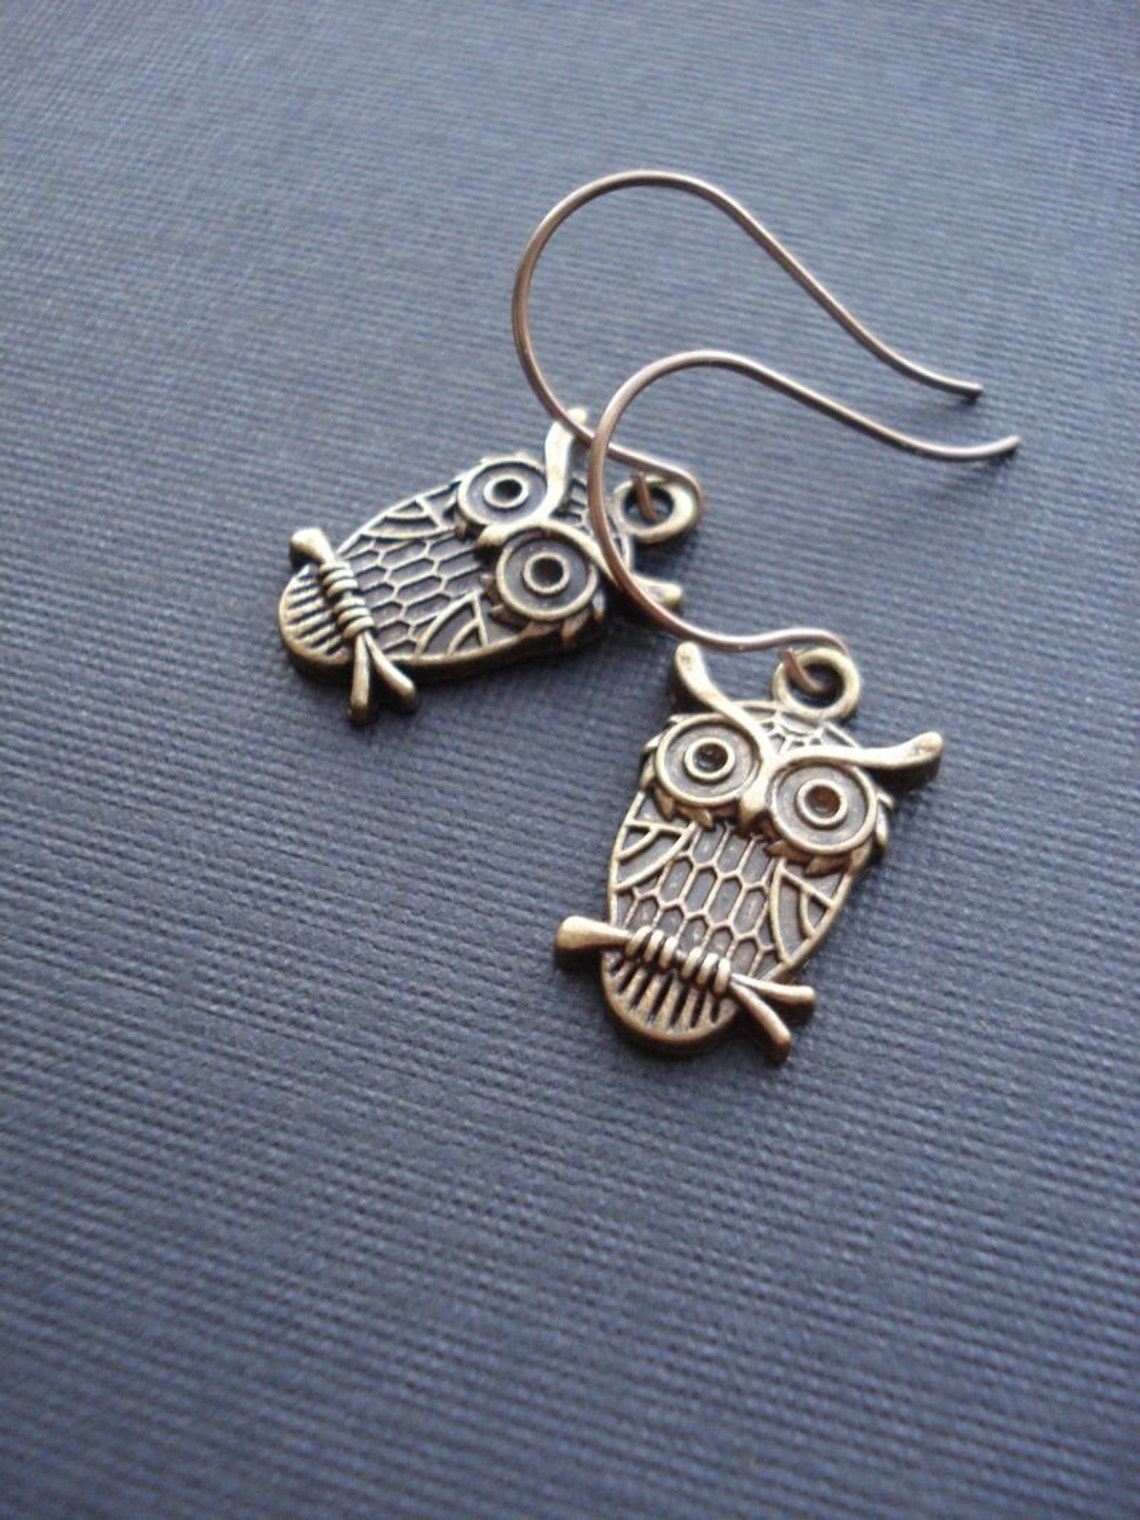 Owl Earrings in Antiqued Brass or Antique Silver Owl Twin - Etsy